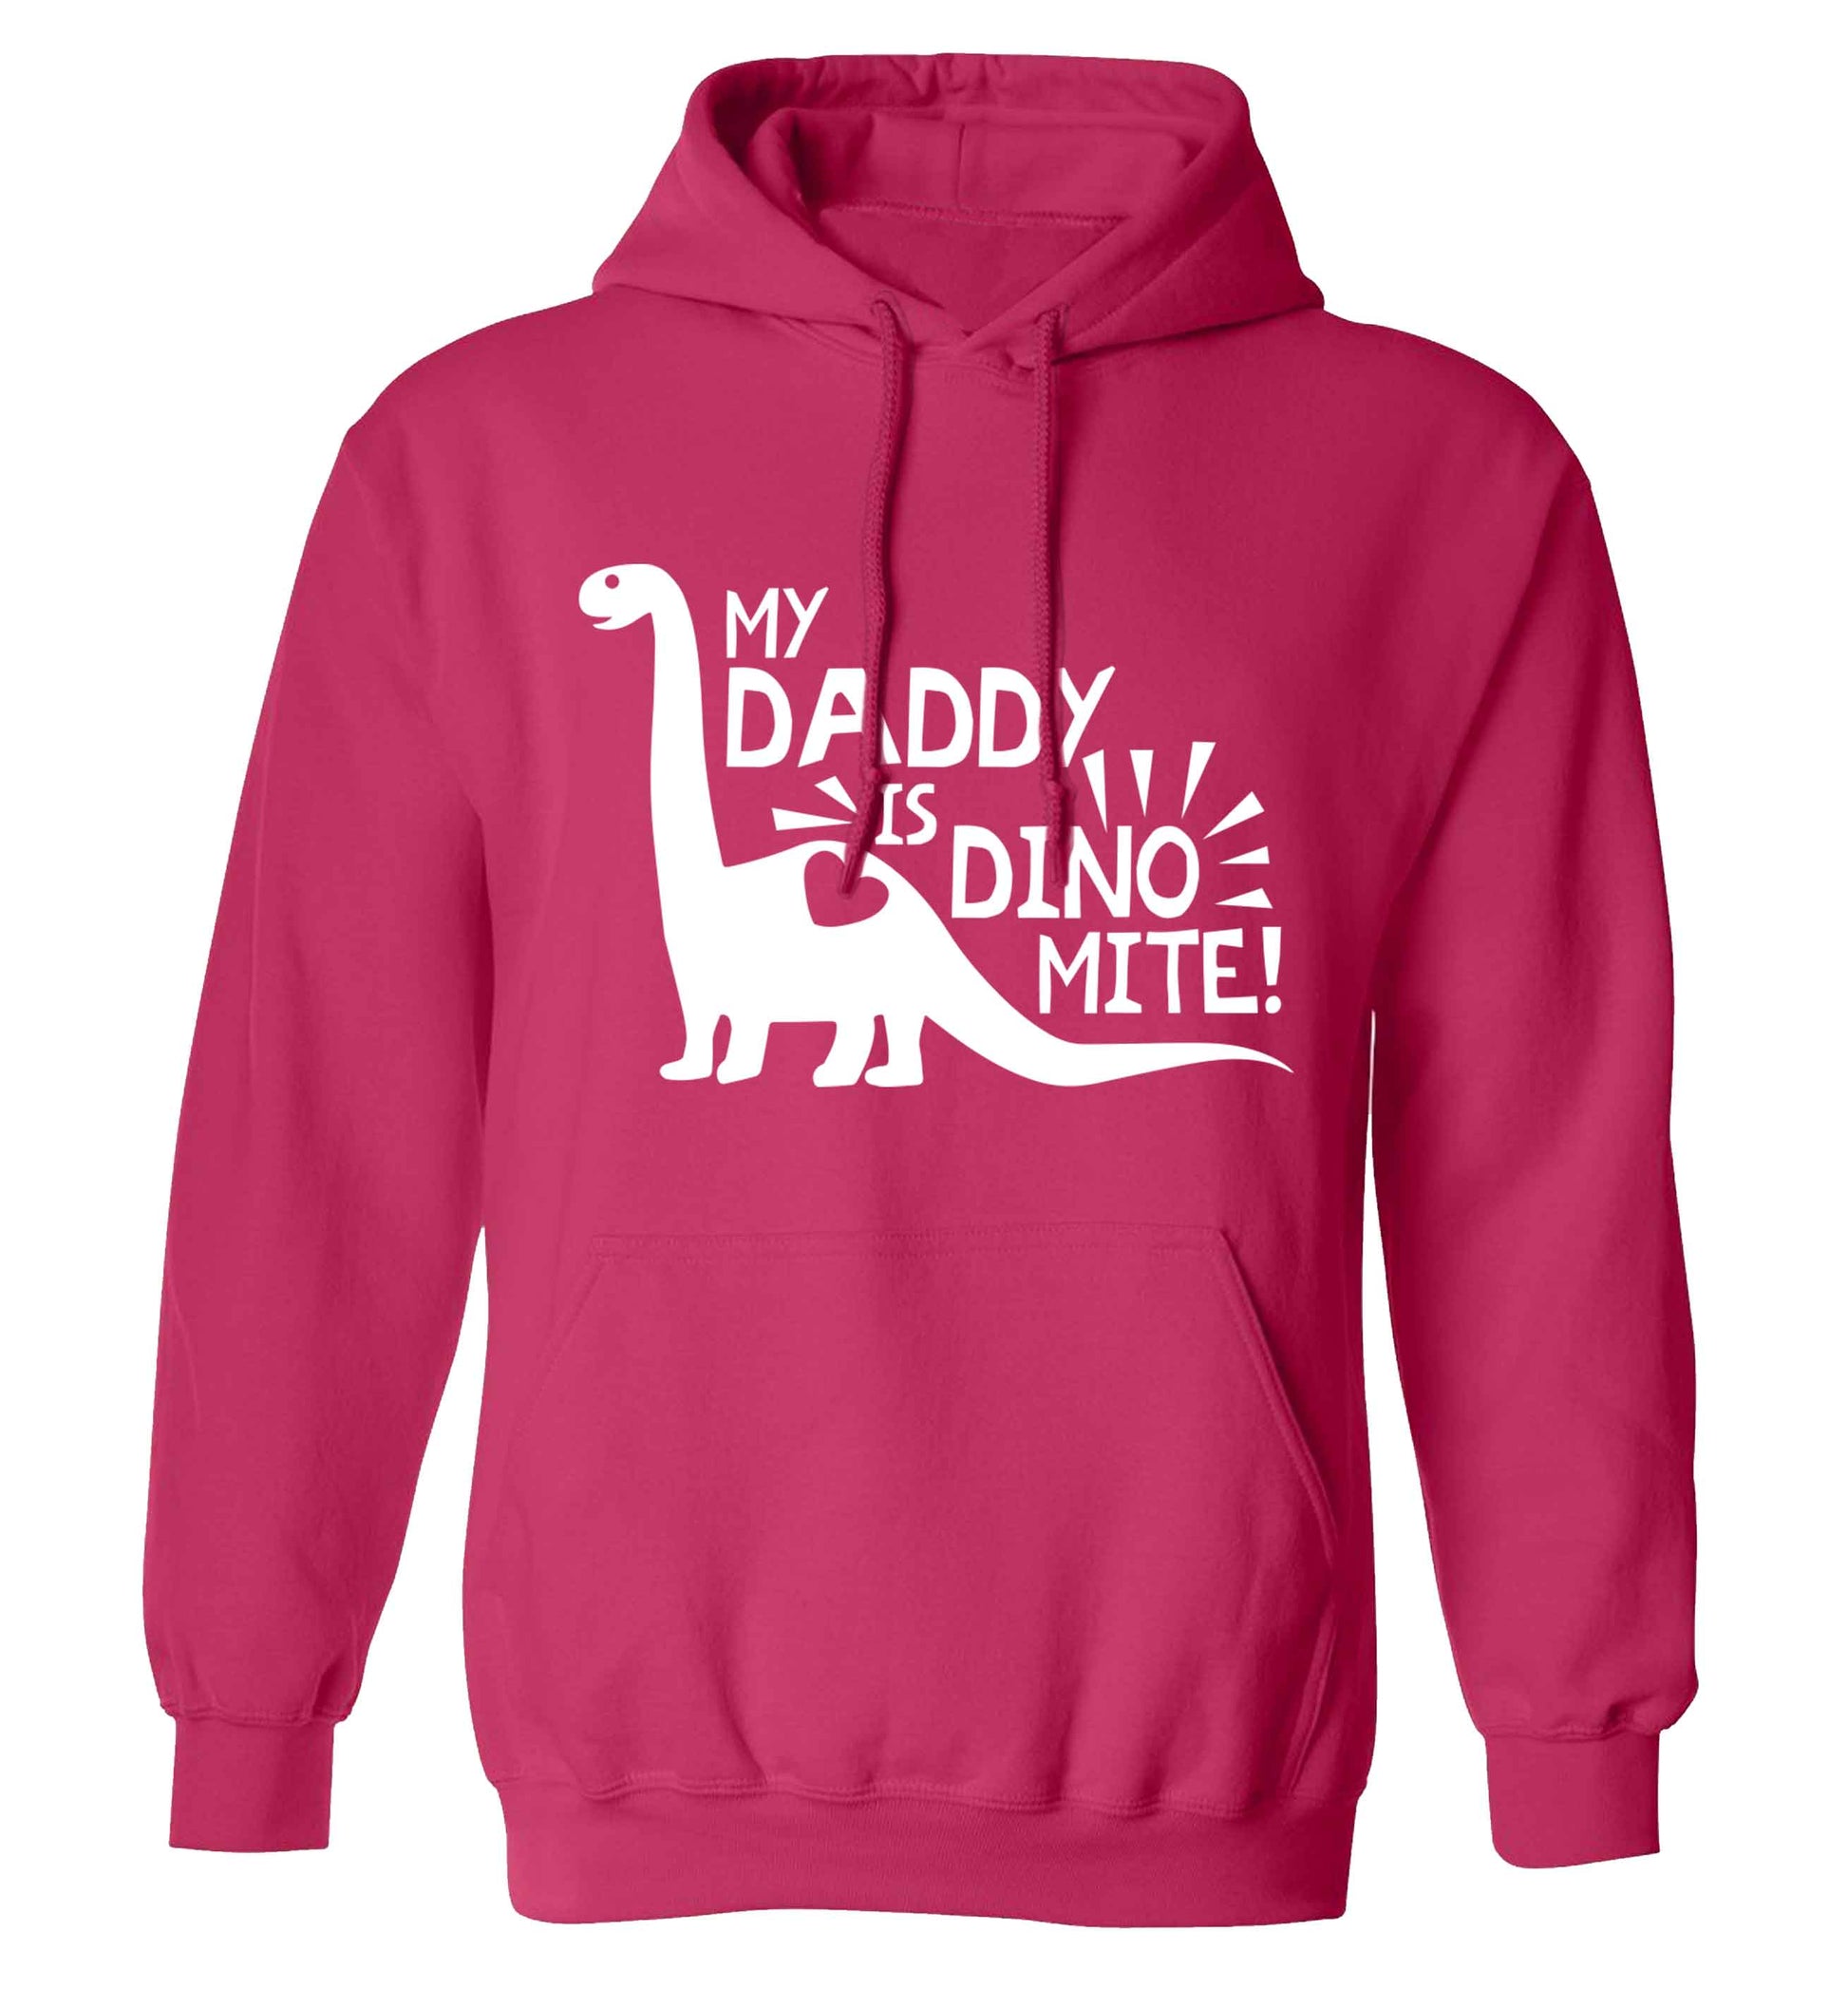 My daddy is dinomite! adults unisex pink hoodie 2XL